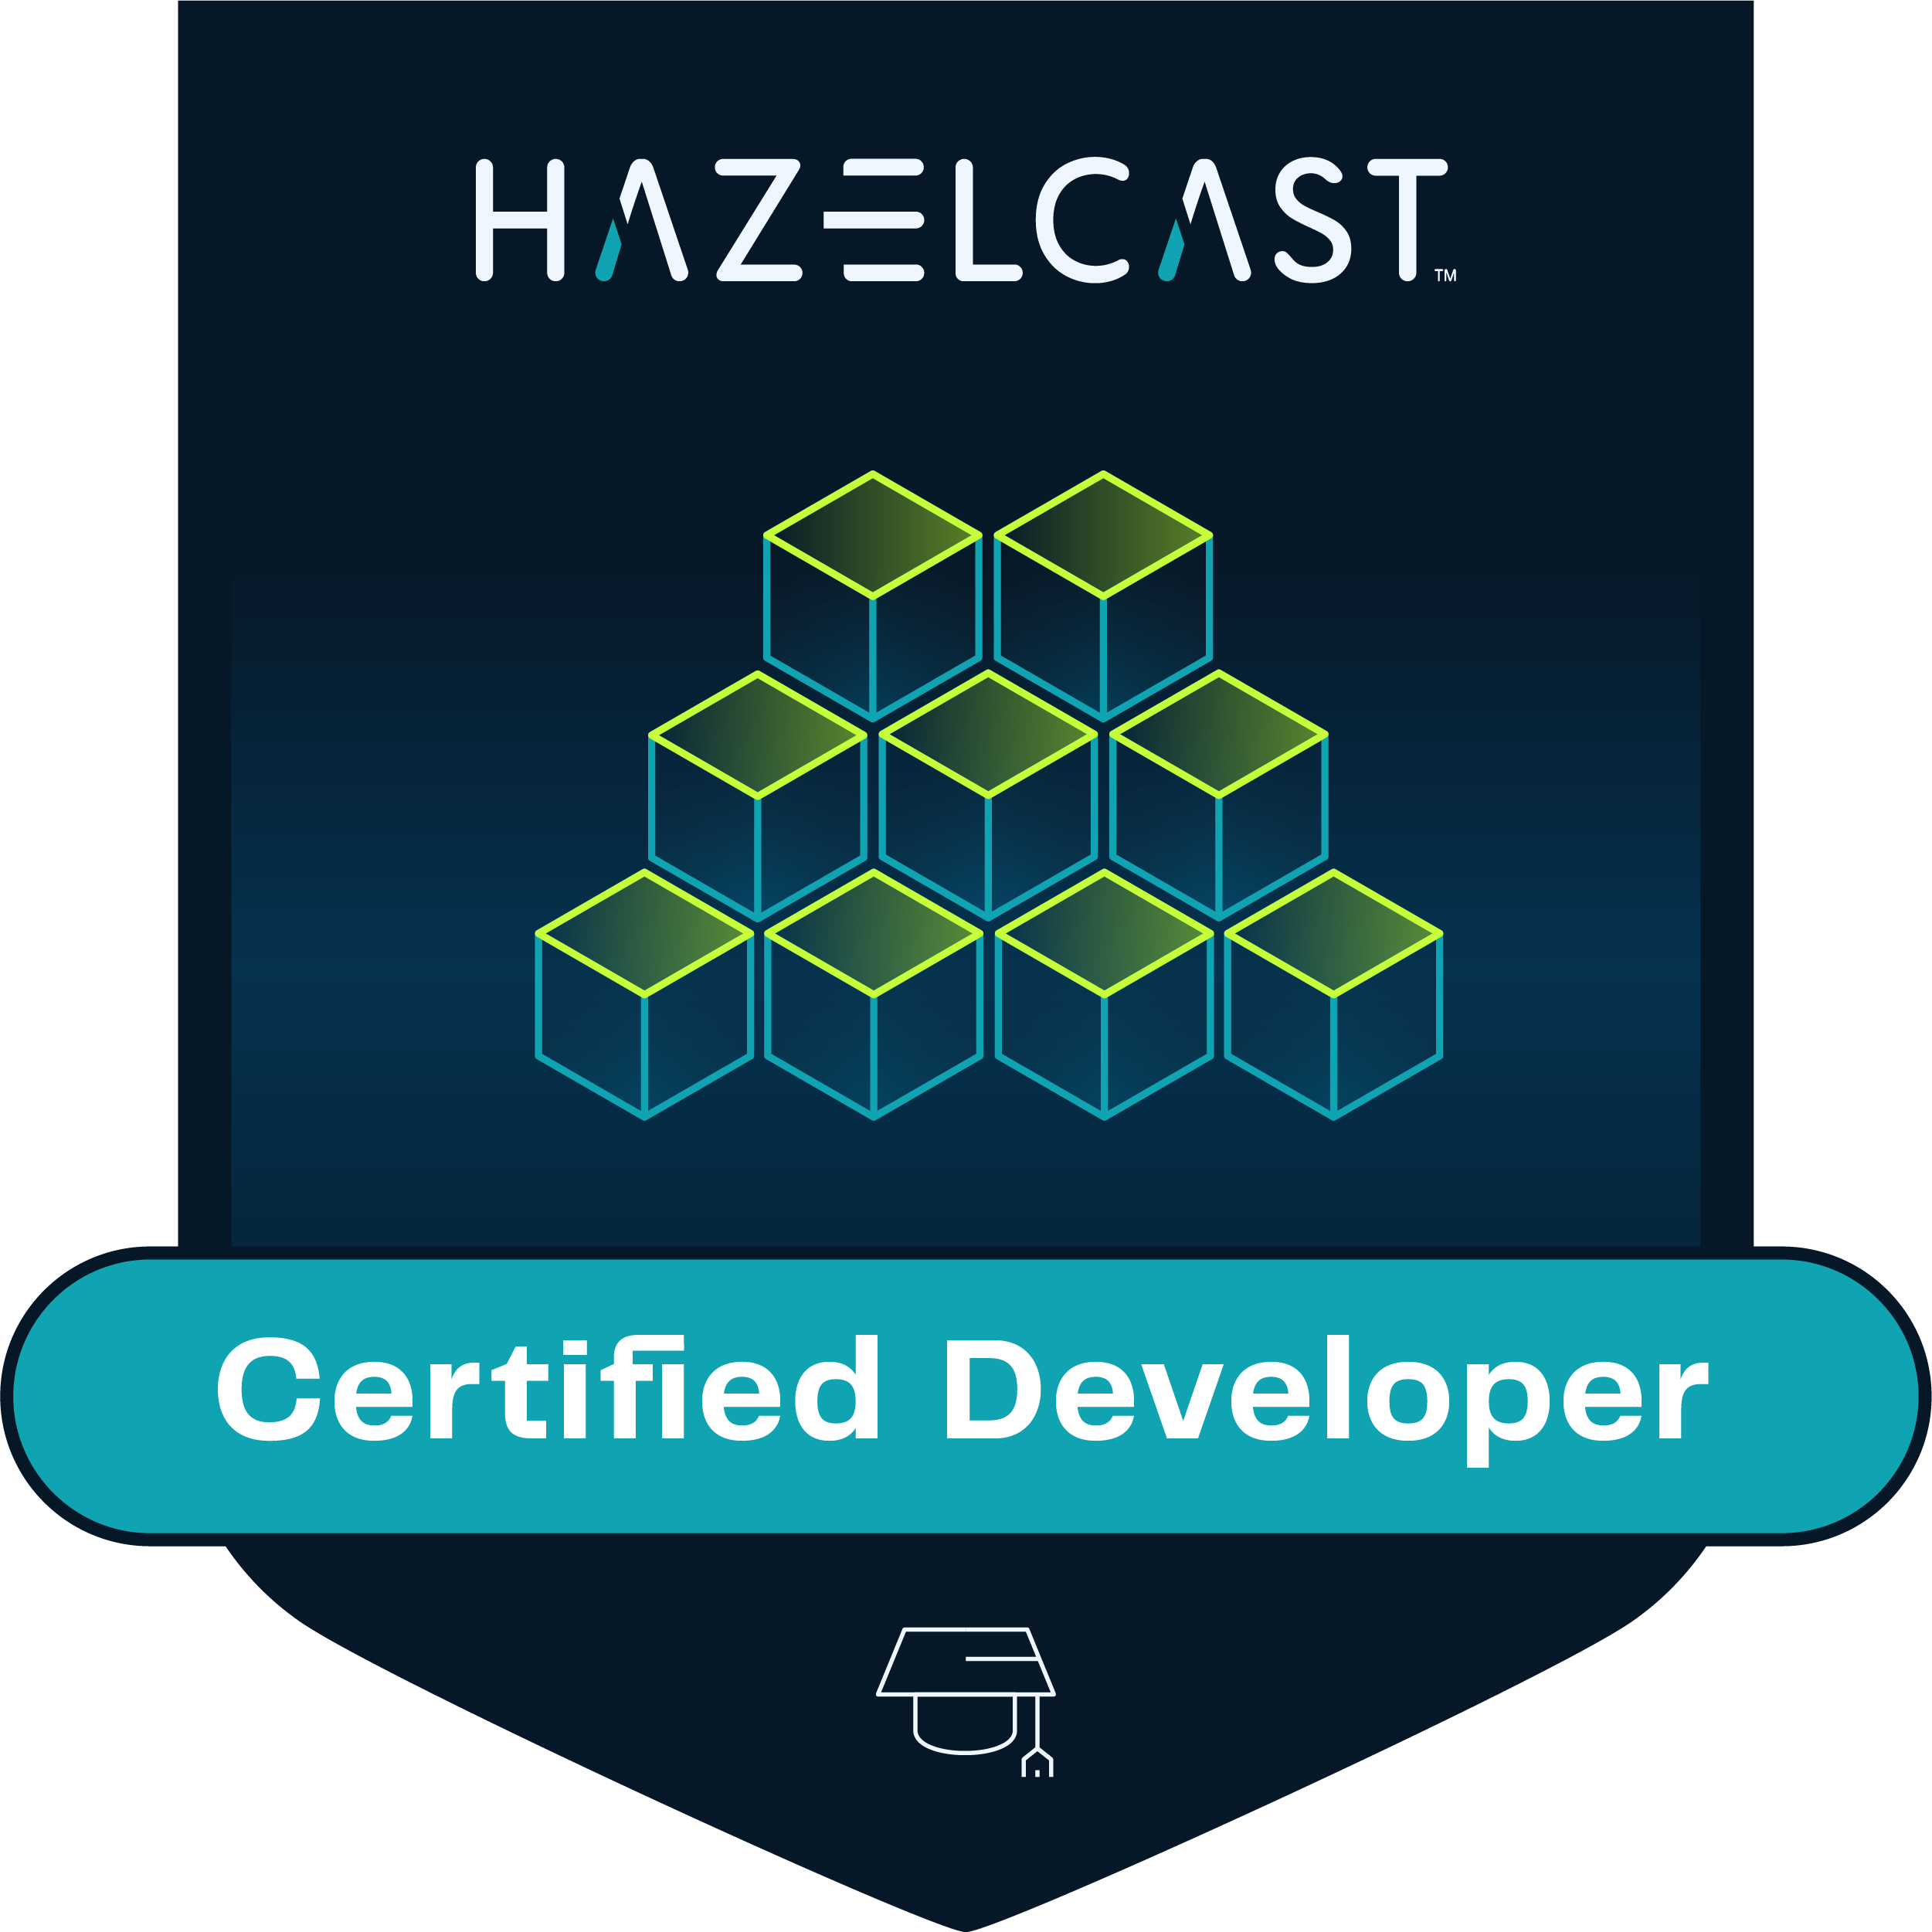  The Certified Developer Credential